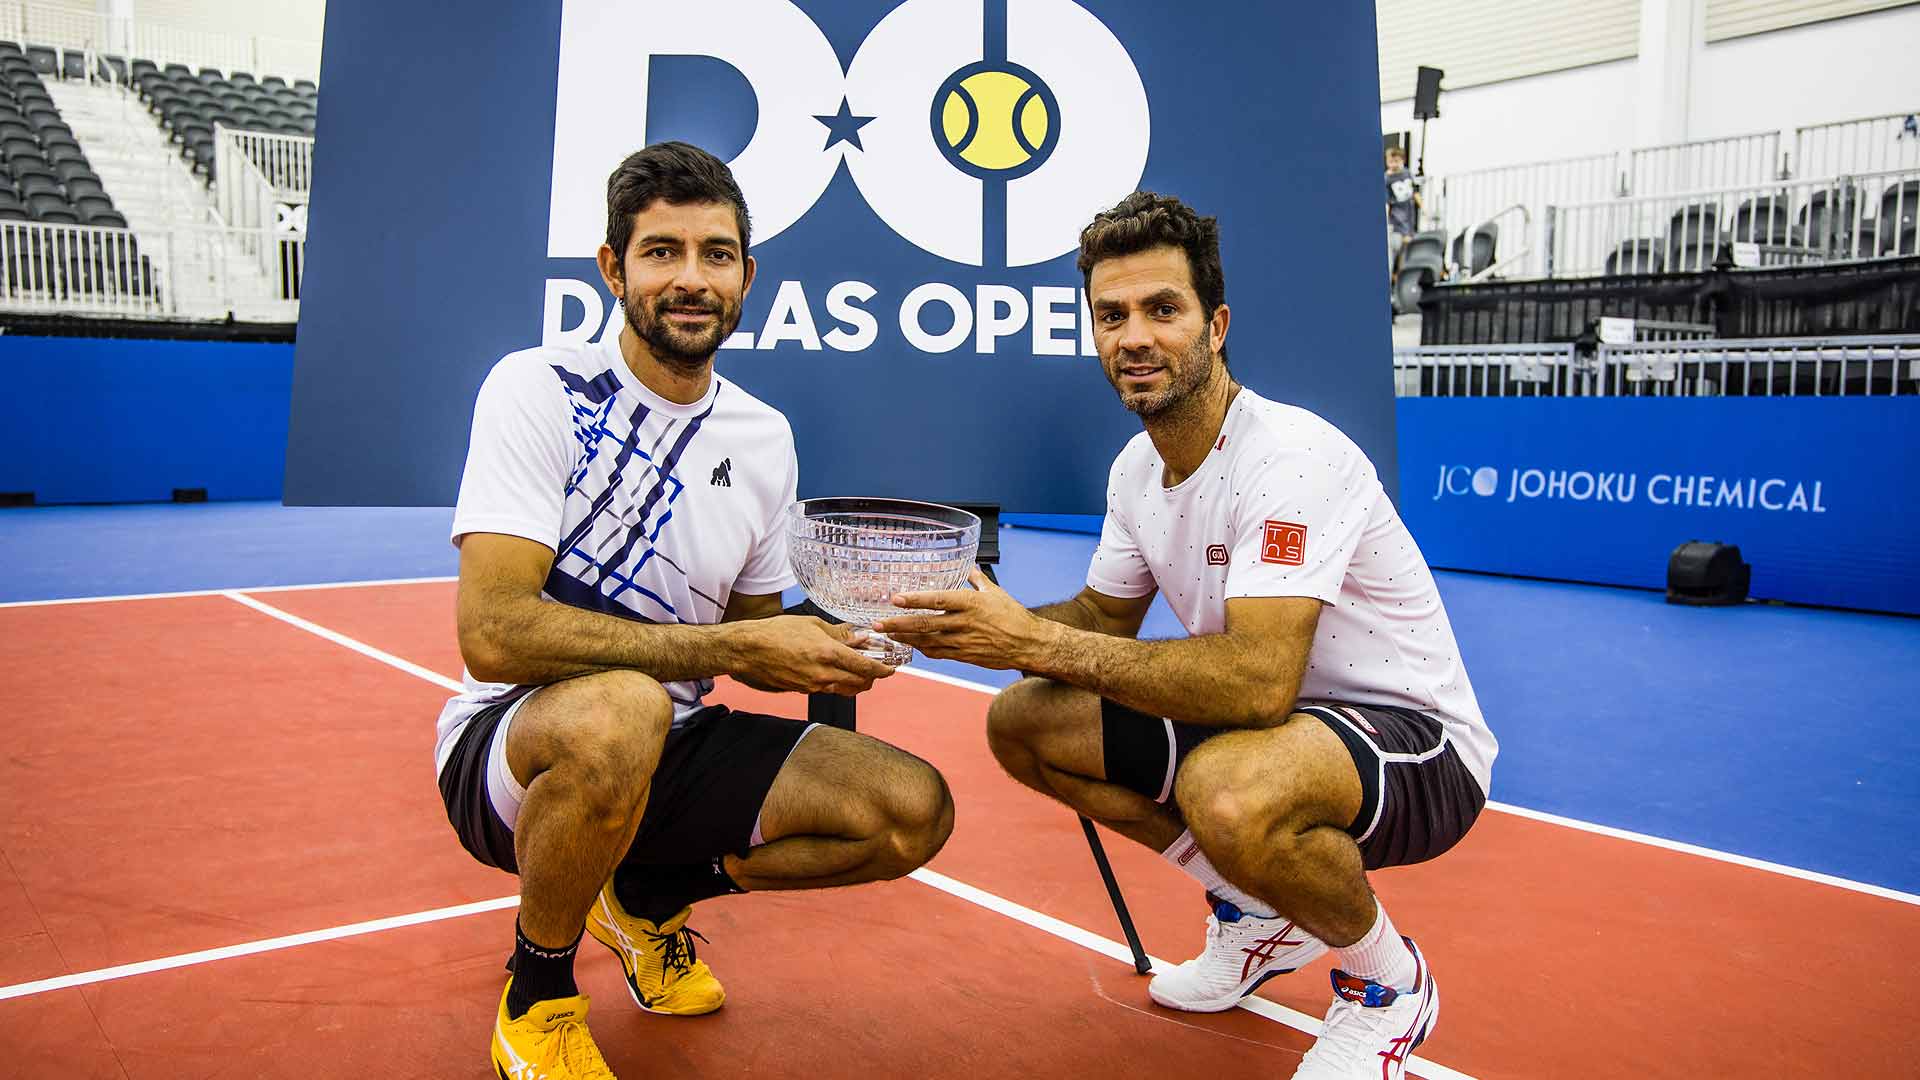 Marcelo Arevalo and Jean-Julien Rojer